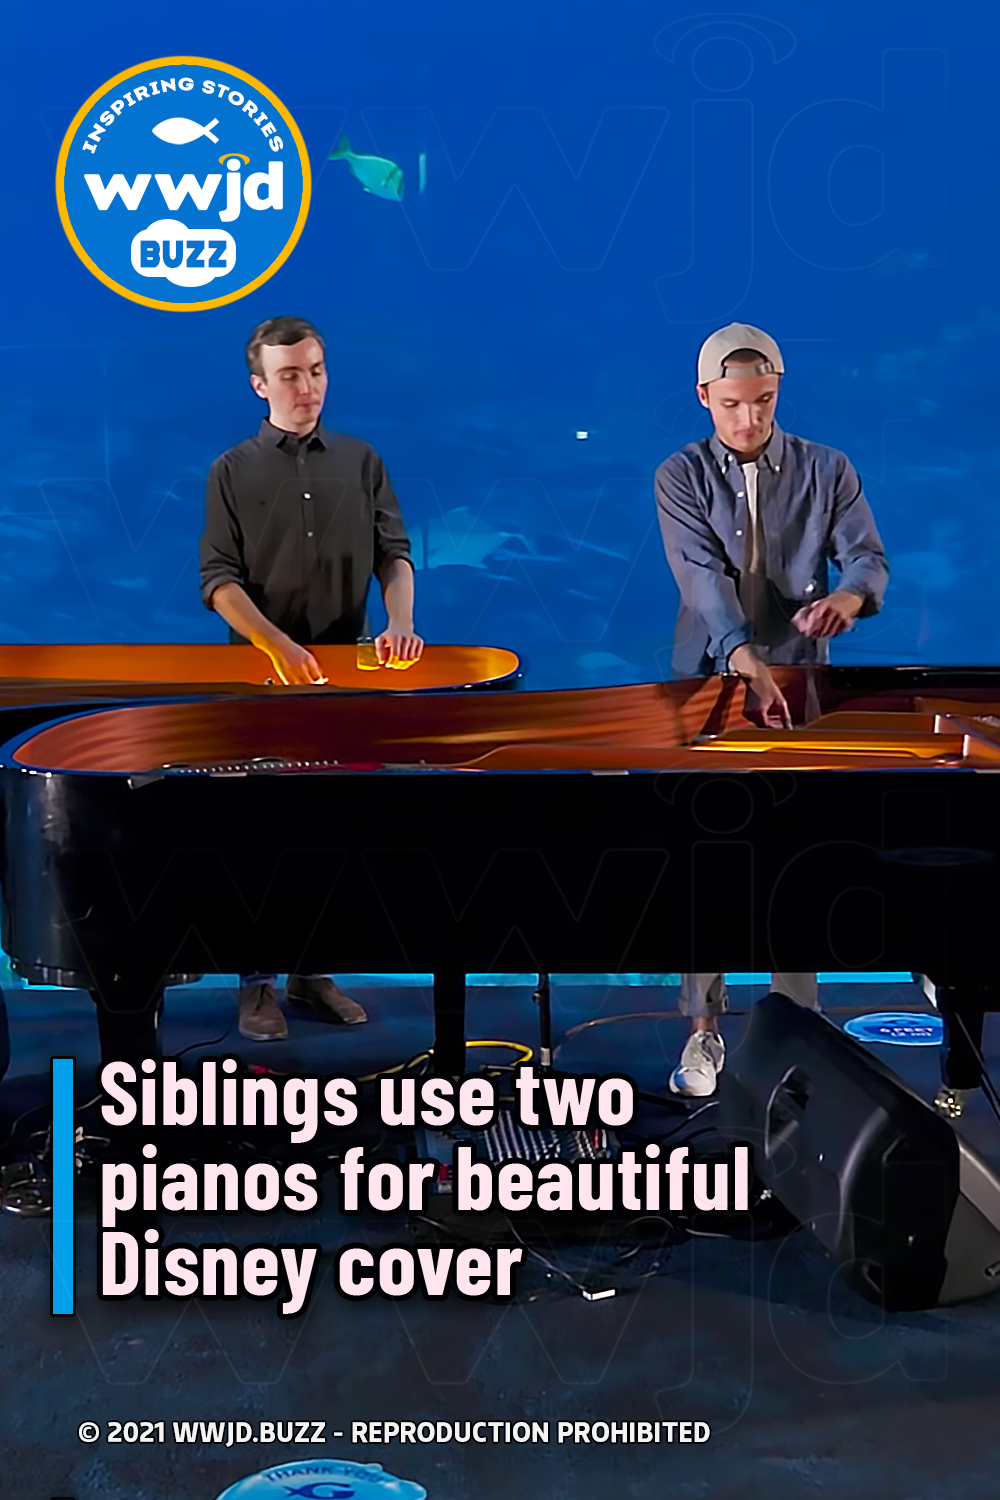 Siblings use two pianos for beautiful Disney cover